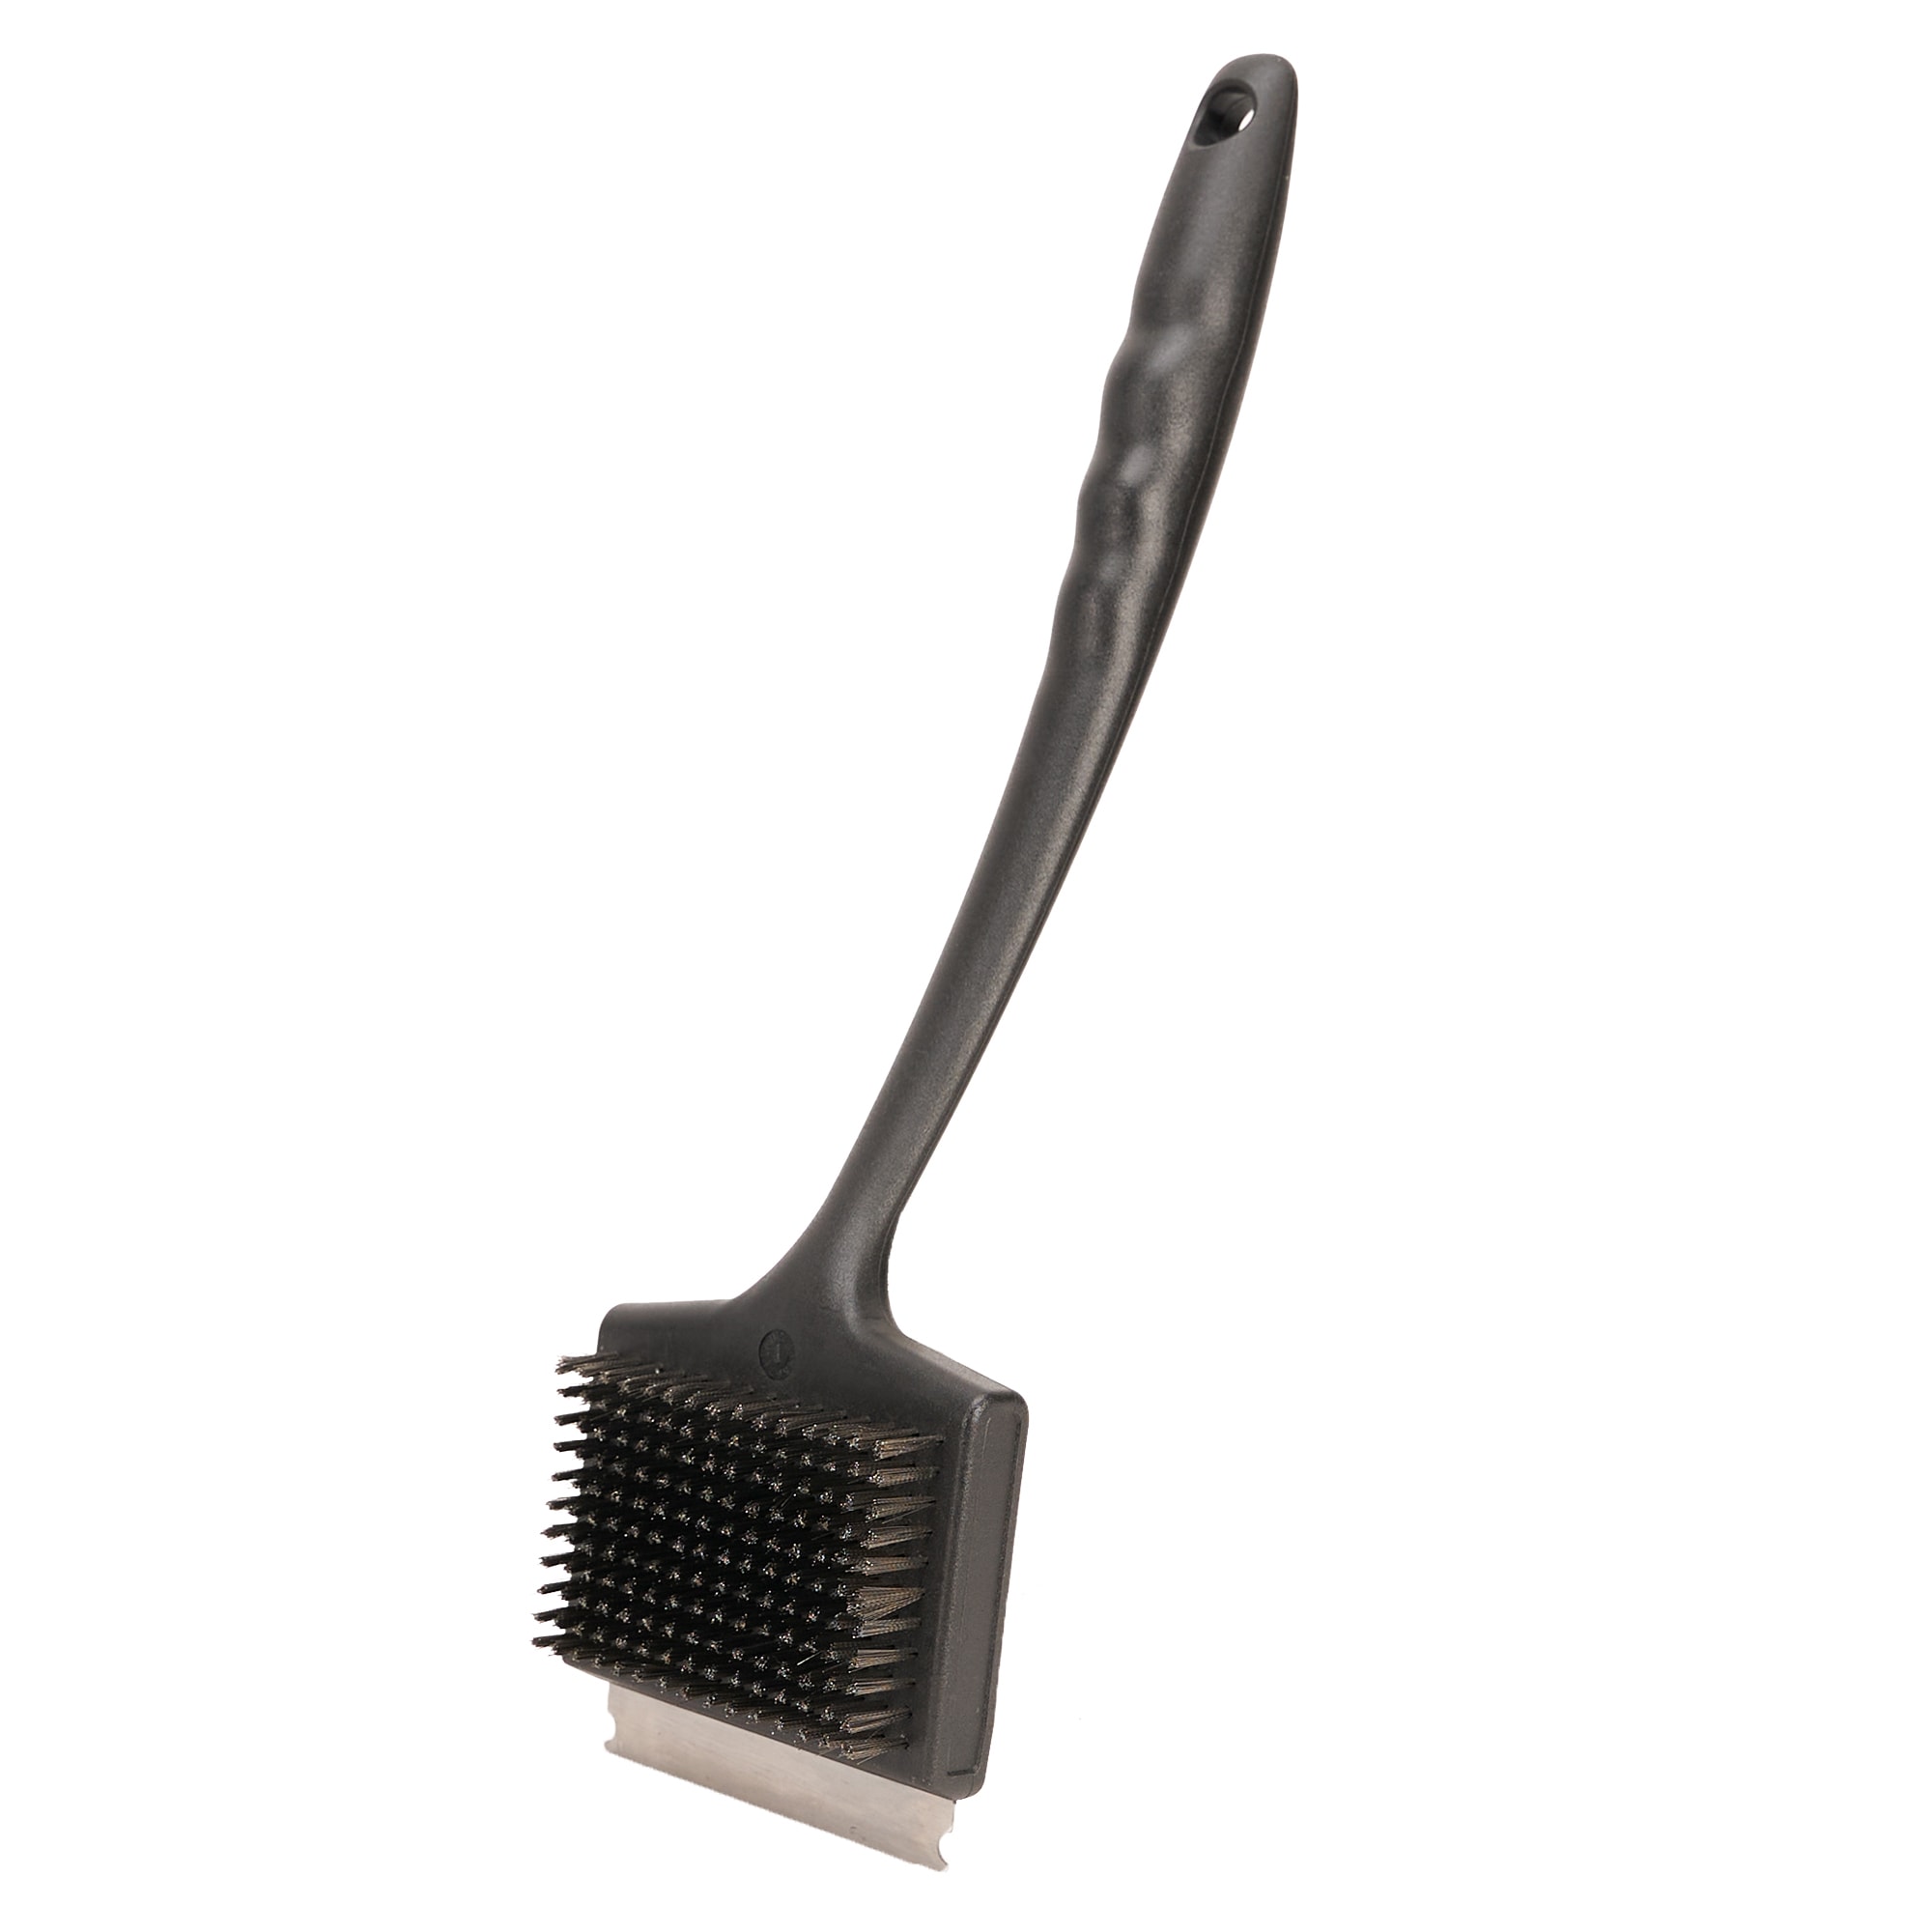 Grill Cleaning Brush, Barbecue Cleaning Brush, Bbq Brush, Kitchen Sink Brush,  Multi-functional Small Brush For Kitchen, For Deep Cleaning Corners,  Grooves, Pots, Stoves, Countertop, Cleaning Supplies, Cleaning Tool, Back  To School Supplies 